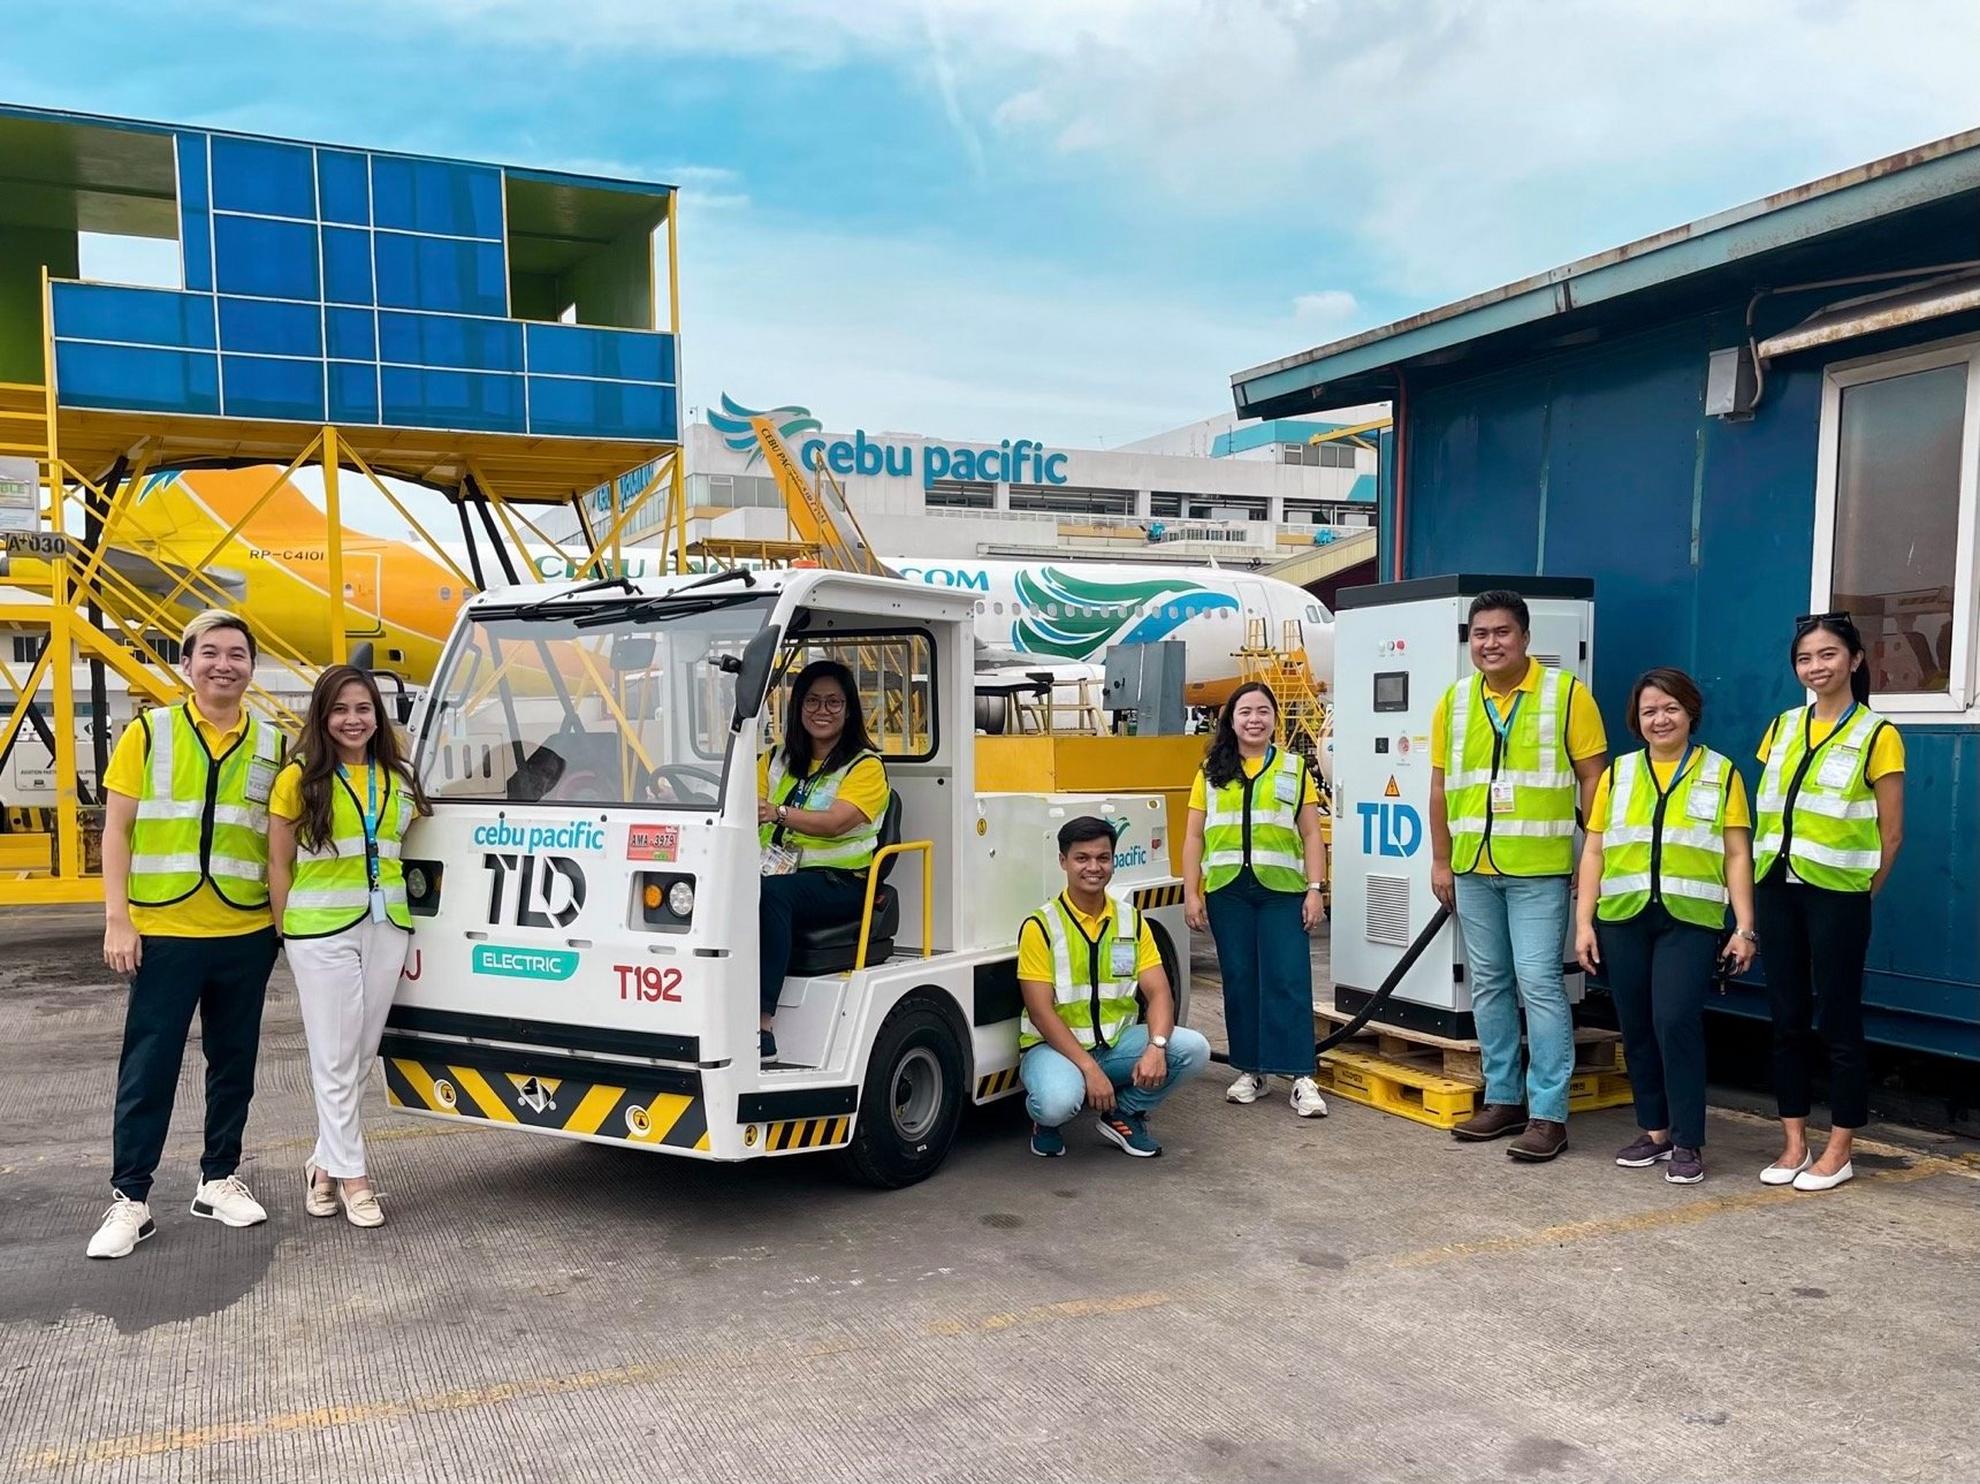 This trial is part of Cebu Pacific's ongoing electric vehicles (EV) transition programme